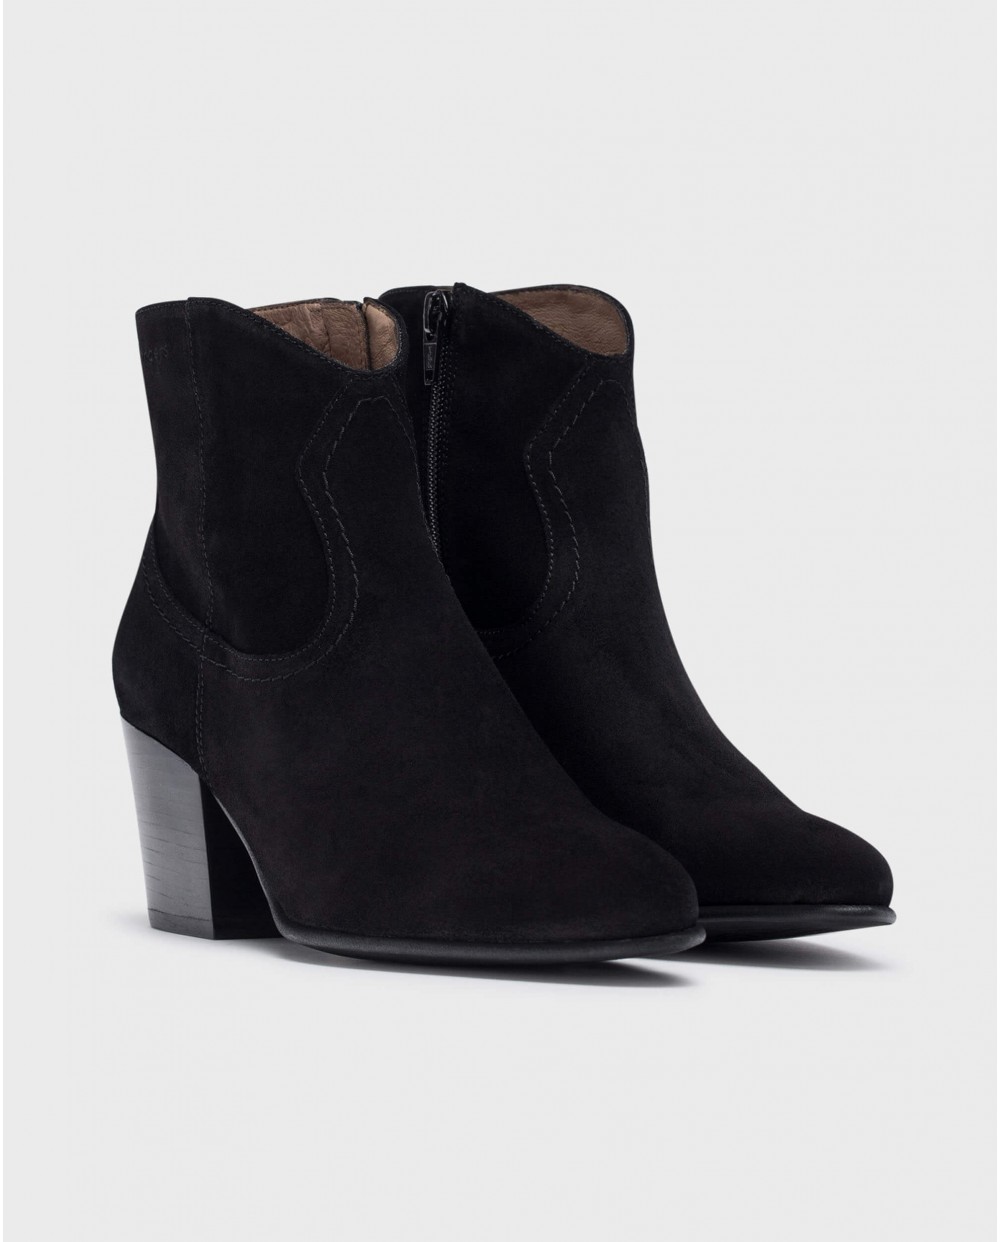 Wonders Cane Black Suede Ankle Boot